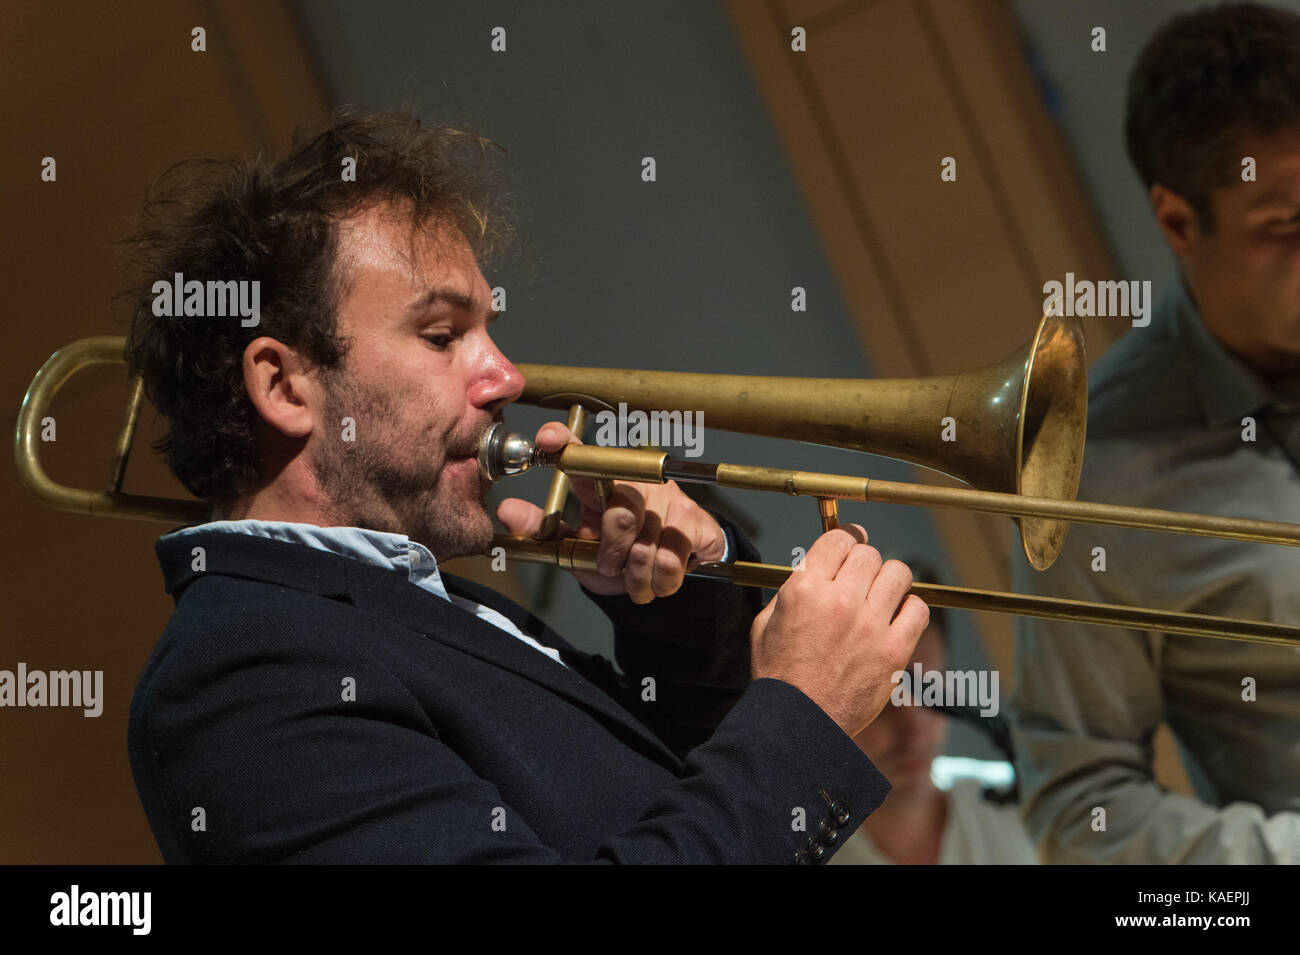 The Trombonist Fidel Fourneyron performed live on 23/9/2017 on the stage of the Casa del Jazz in Rome on the concluding night of a Franco-Italian jazz and improvised music festival 'Una Striscia di Terra Feconda'. With him on stage Cristiano Arcelli high sax (winner of the national competition MIDJ - National Association of jazz musicians), Francesco Diodati on guitar, Matteo Bortone on the double bass and Bernardo Guerra on drums. Fidel Fourneyron (Photo by Leo Claudio De Petris / Pacific Press) Stock Photo